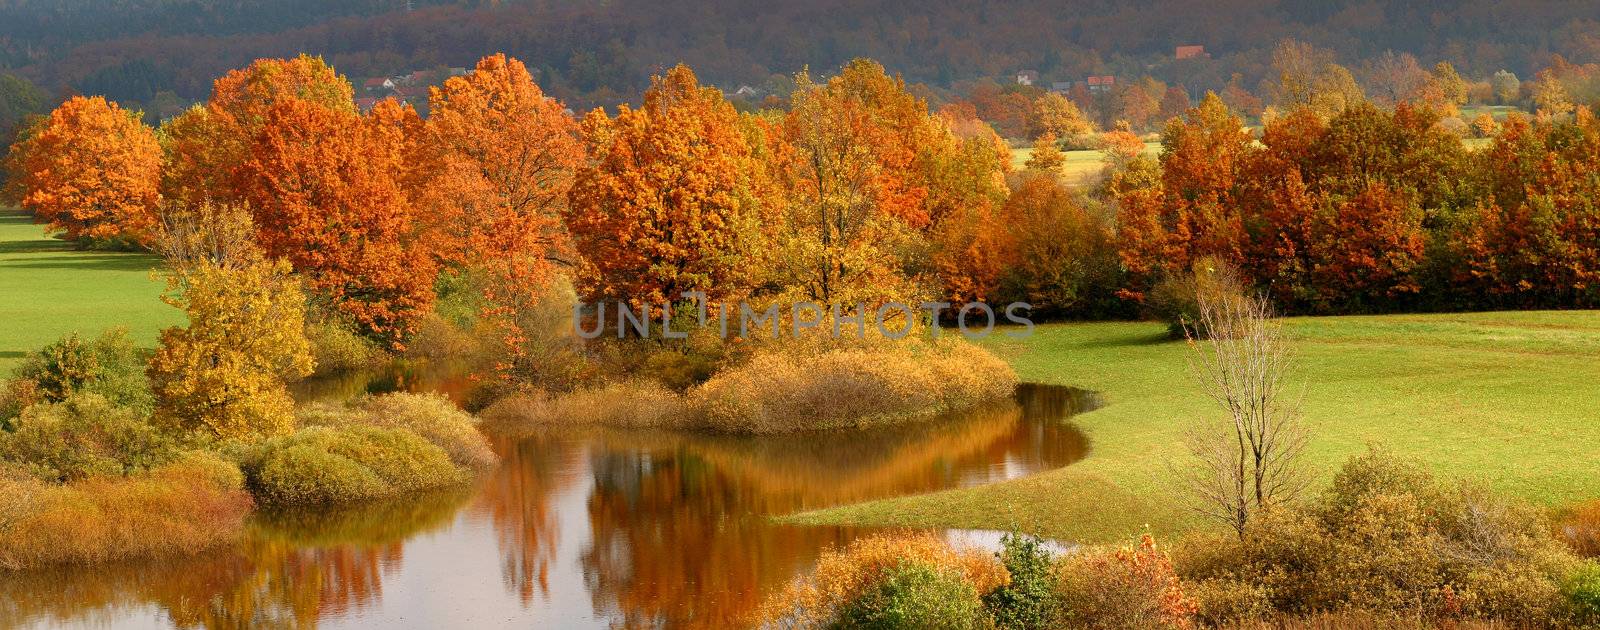 Autumn coloured trees with reflection in water